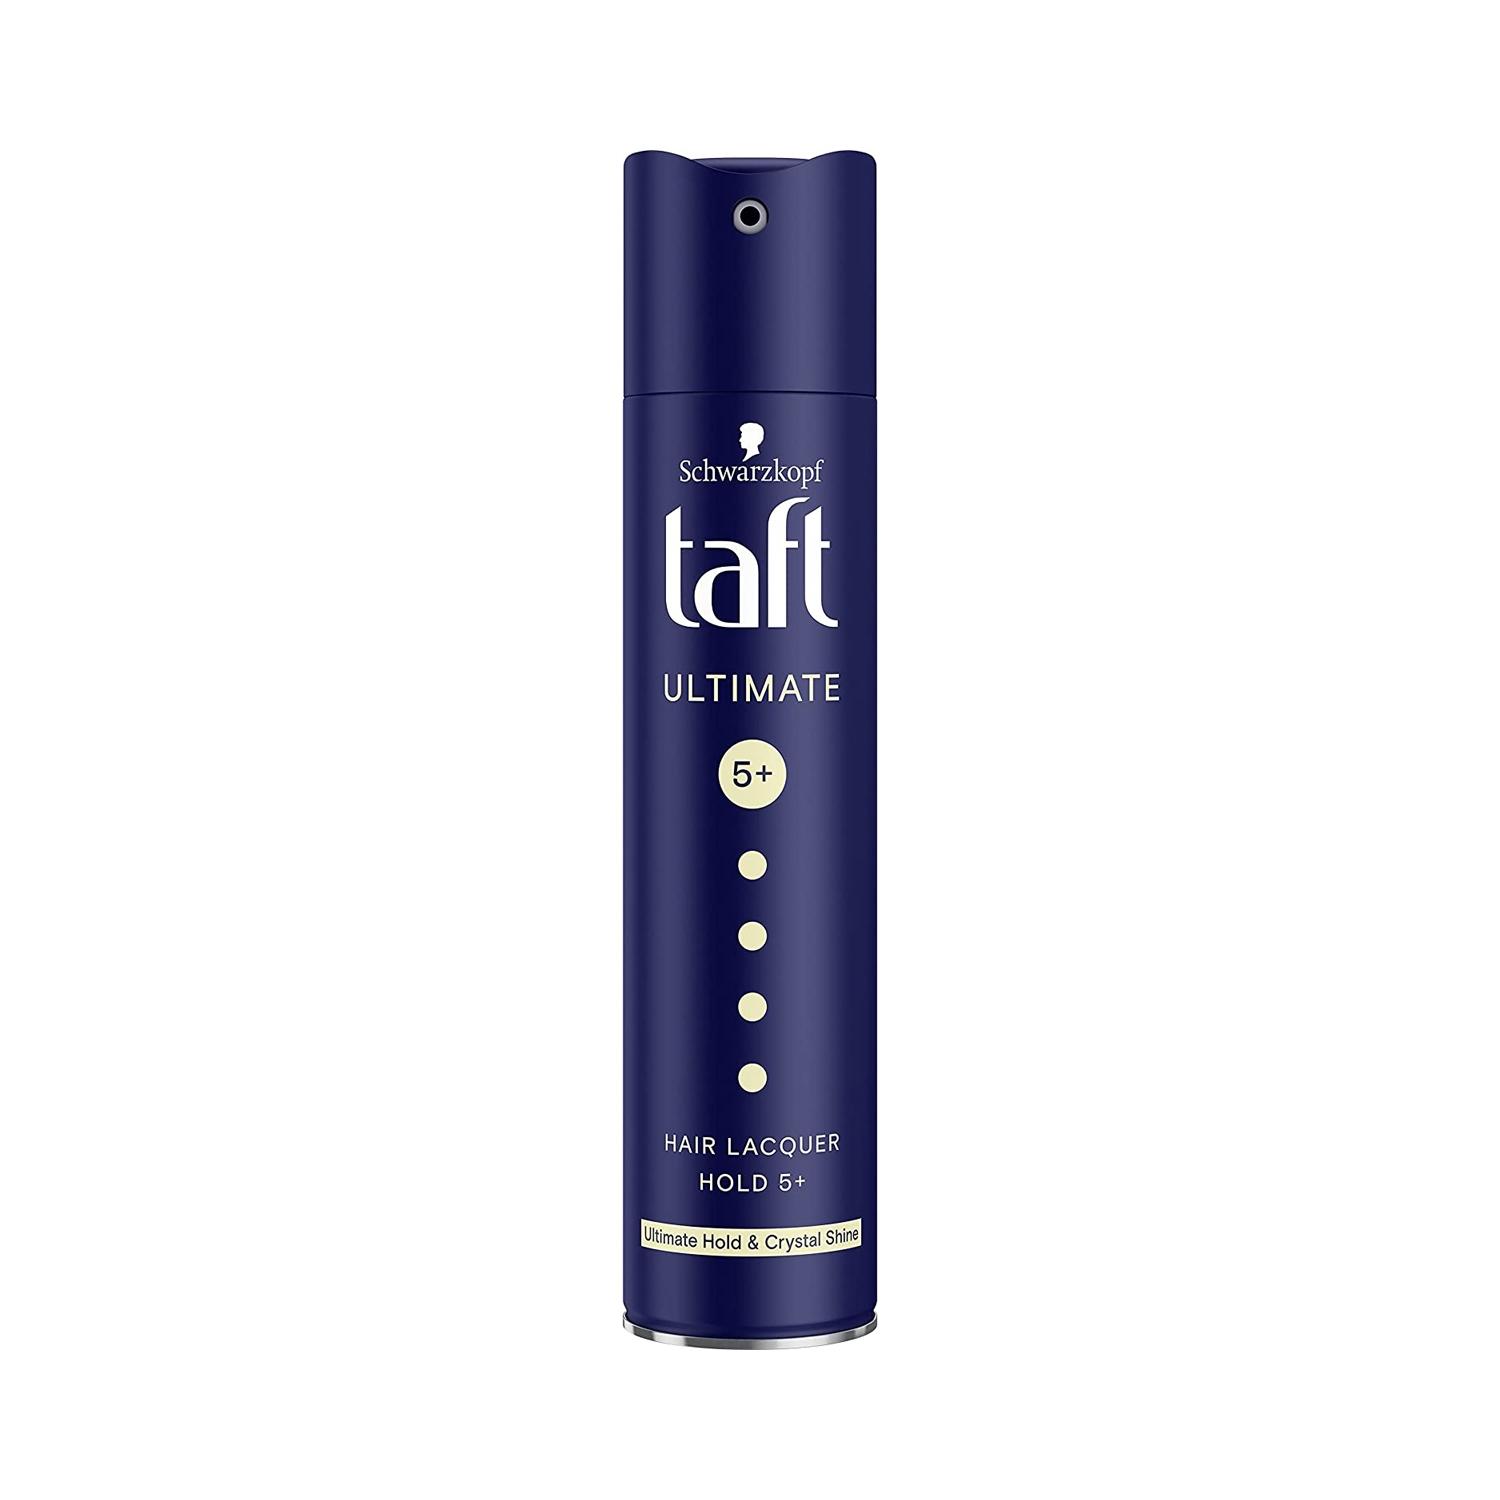 schwarzkopf taft ultimate hair lacquer ultimately strong 6 hair spray (250ml)